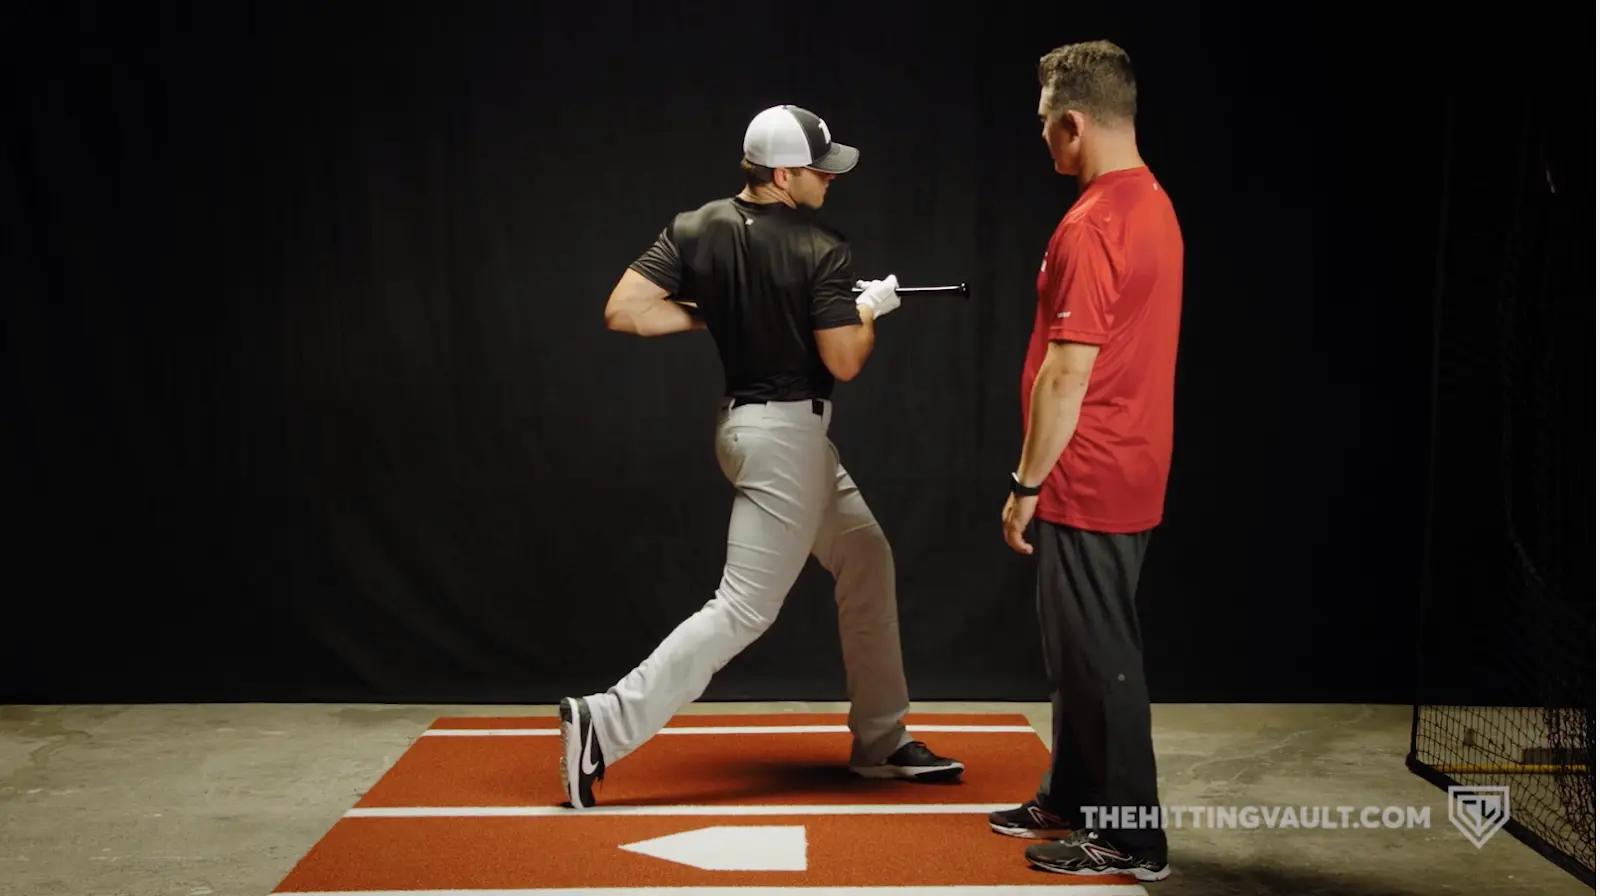 The Full Turn Drill - end of the swing